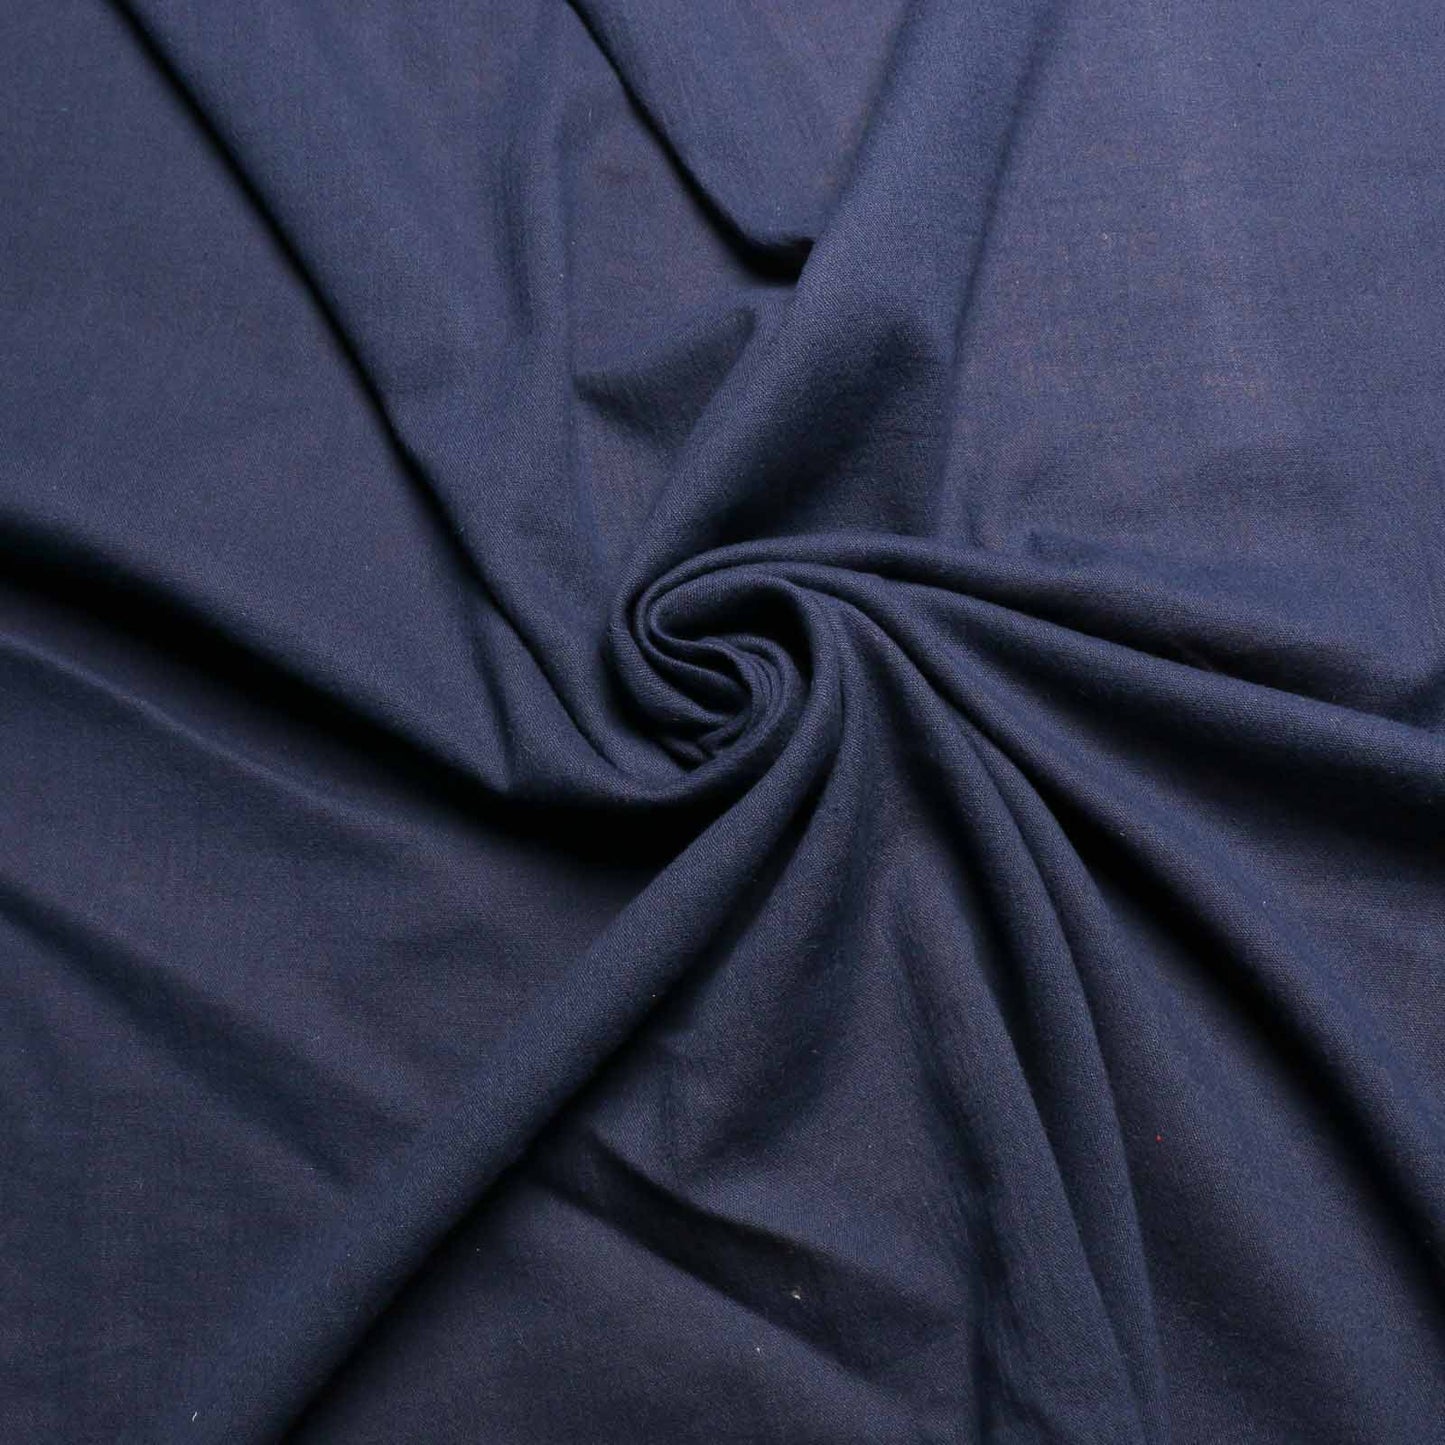 navy blue cotton gauze dressmaking fabric with crinkle effect texture